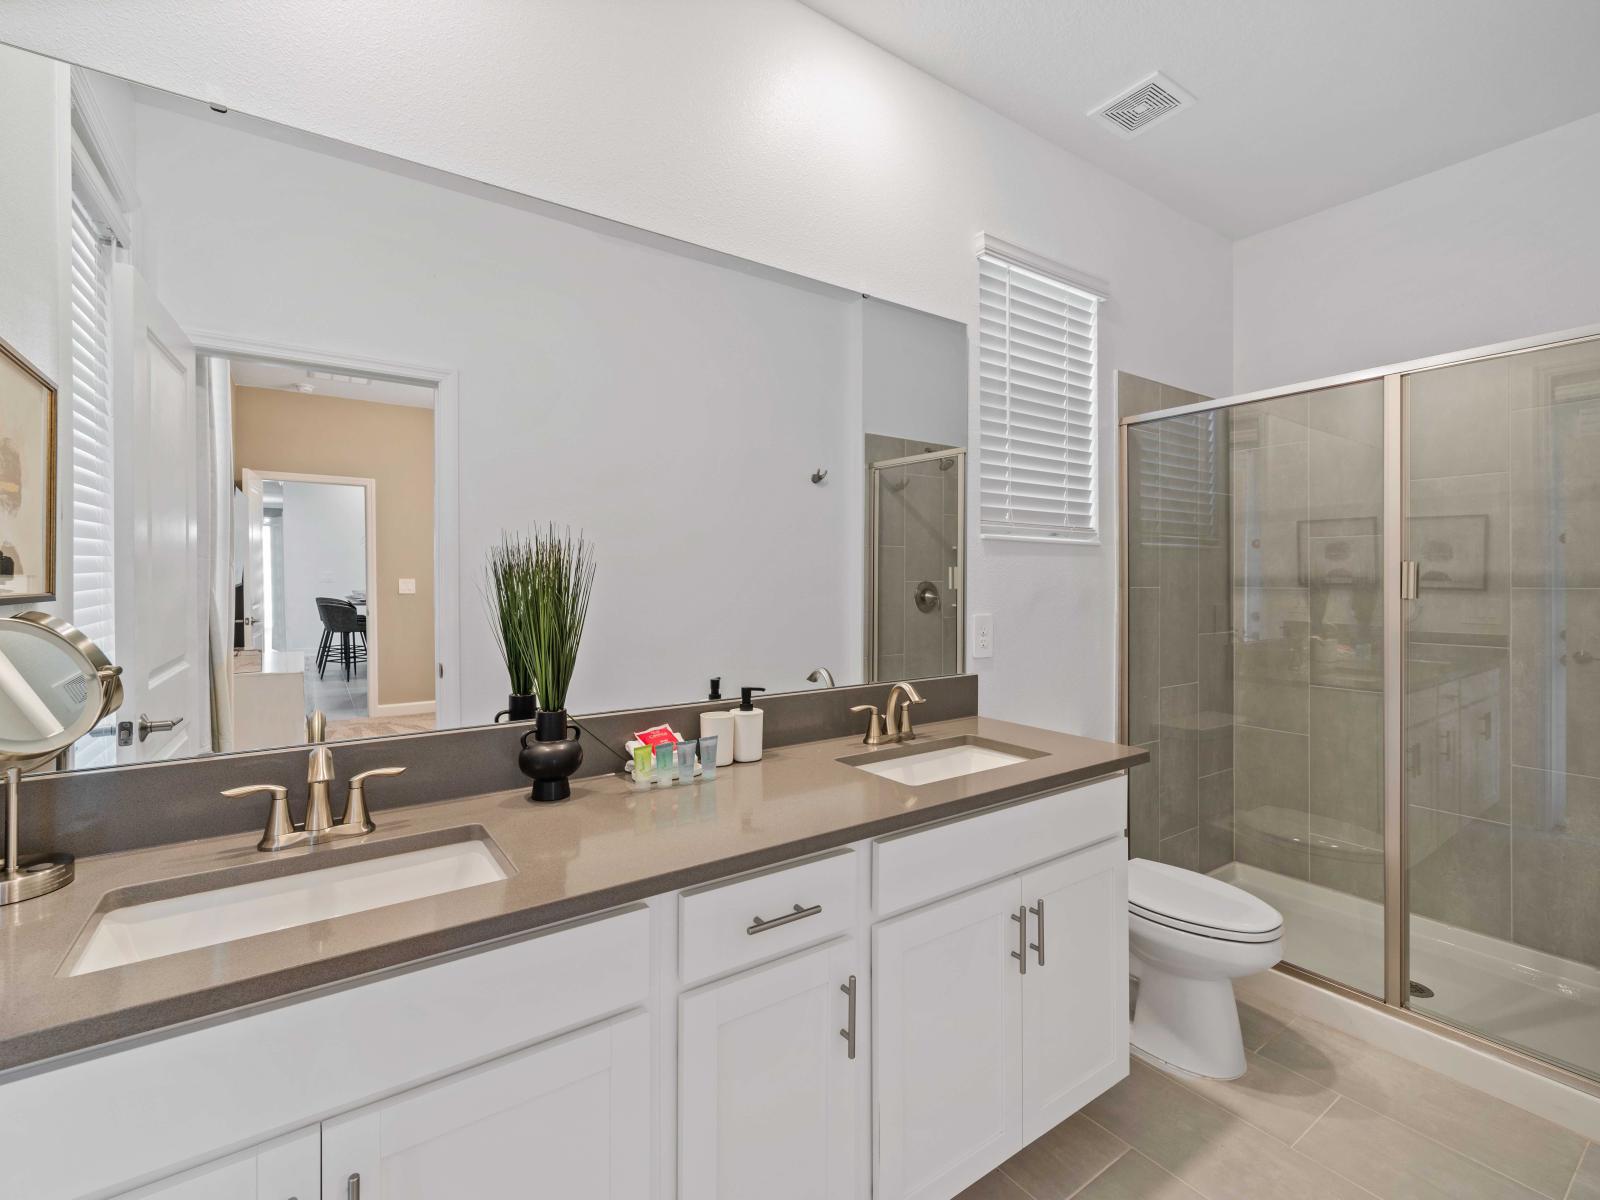 Luxury Bathroom of the Home in Davenport Florida - Featuring a decadent and  modern walk-in shower  - Lavish dual vanity with large mirror